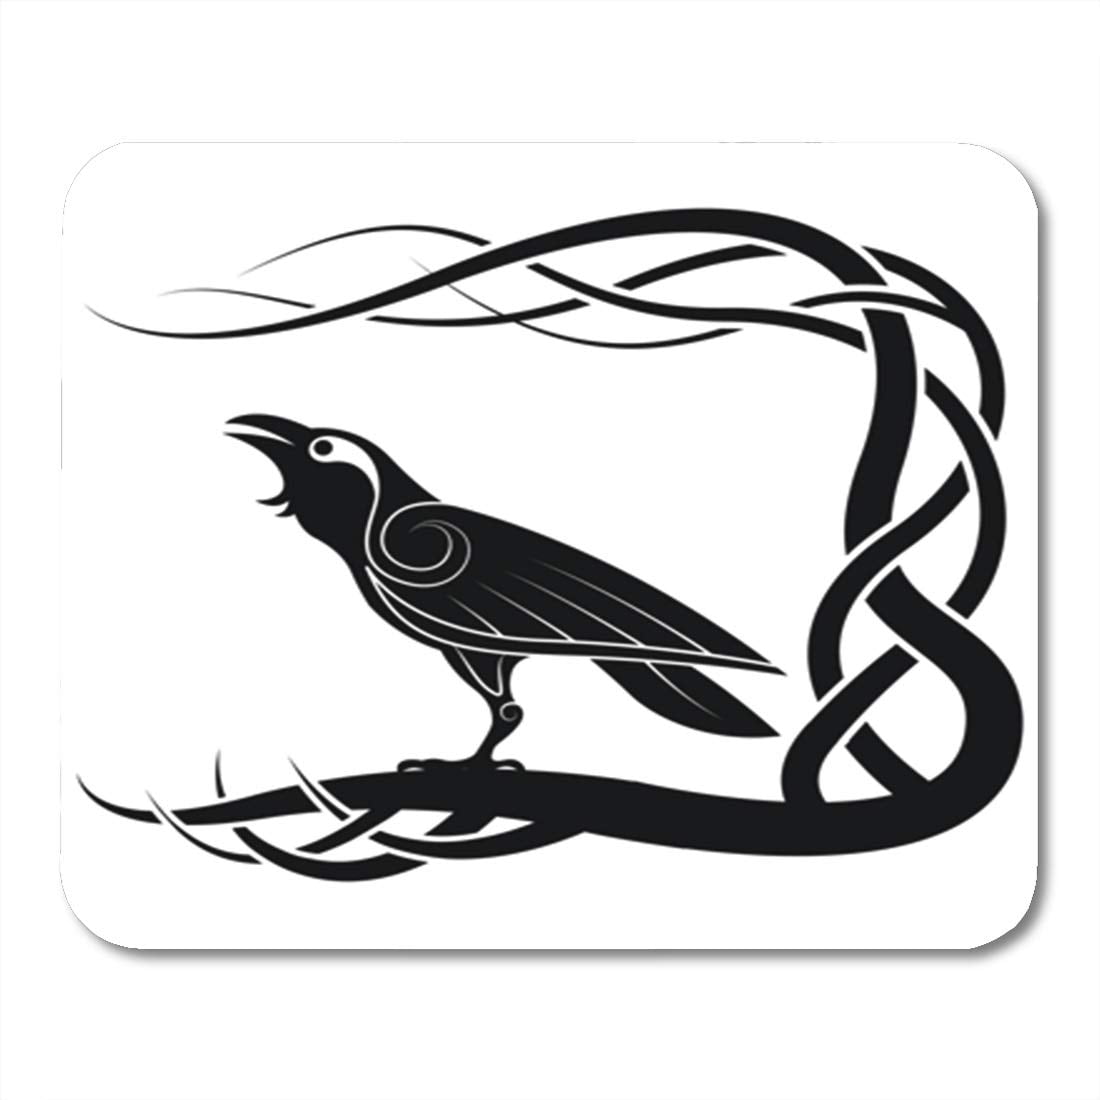 SYMSPAD Mousepads for Computers One Crow Pagan Raven Wildlife Celtic Art Mythology Bird Black Knot Pattern Design Dark Oblong Shape 8.6 X 7.1 in Inches Non-Slip Oblong Gaming Mouse Pad